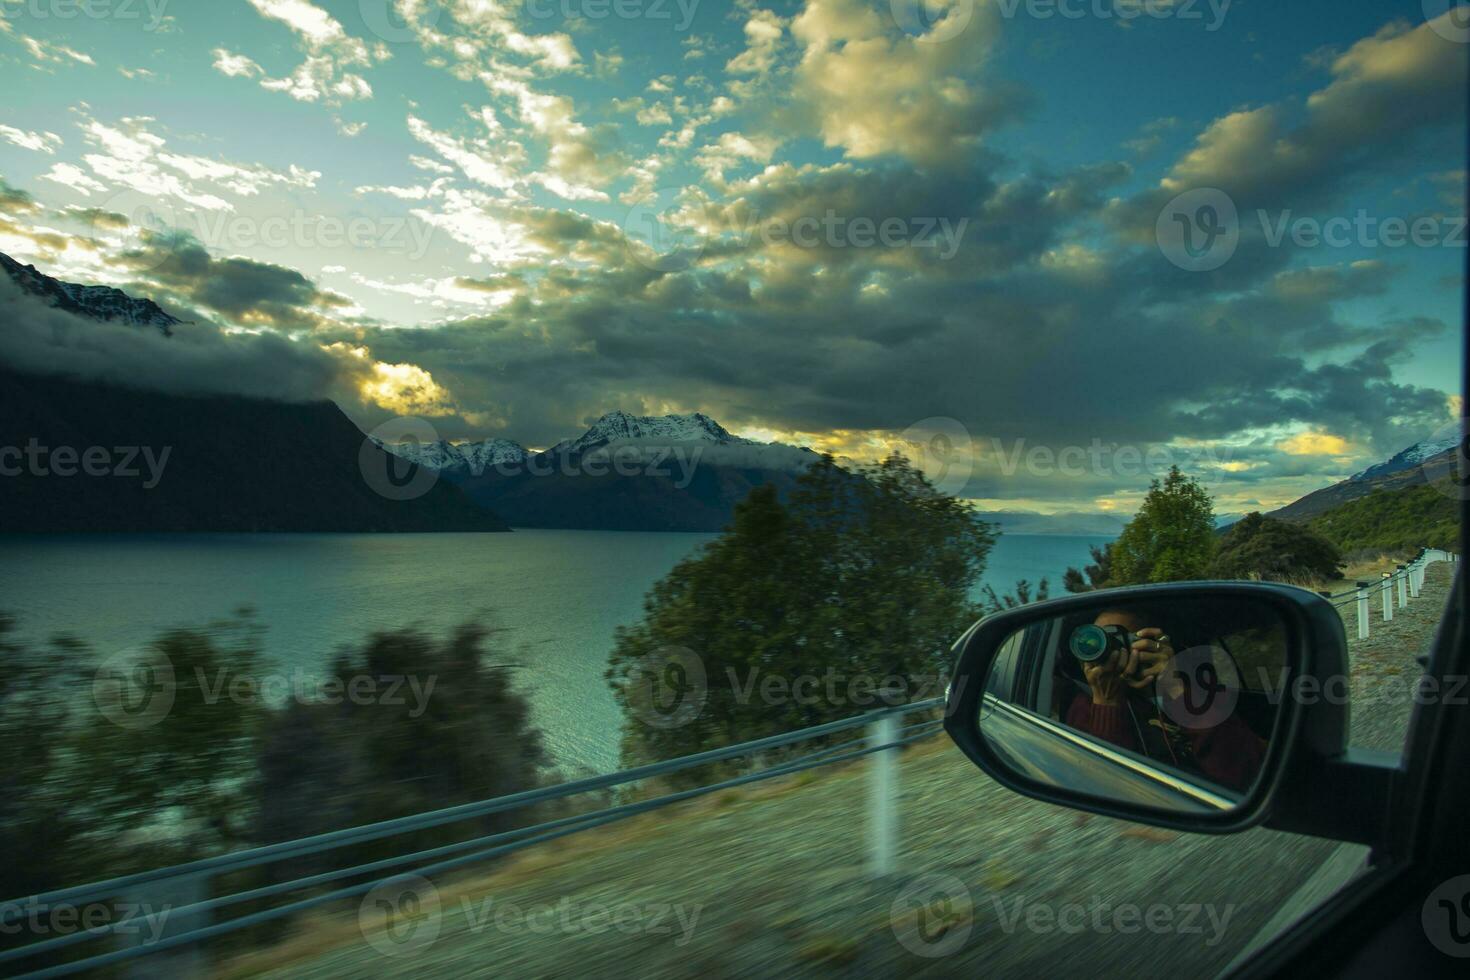 traveller taking a photo of lake wakatipu while car driving on queentown road